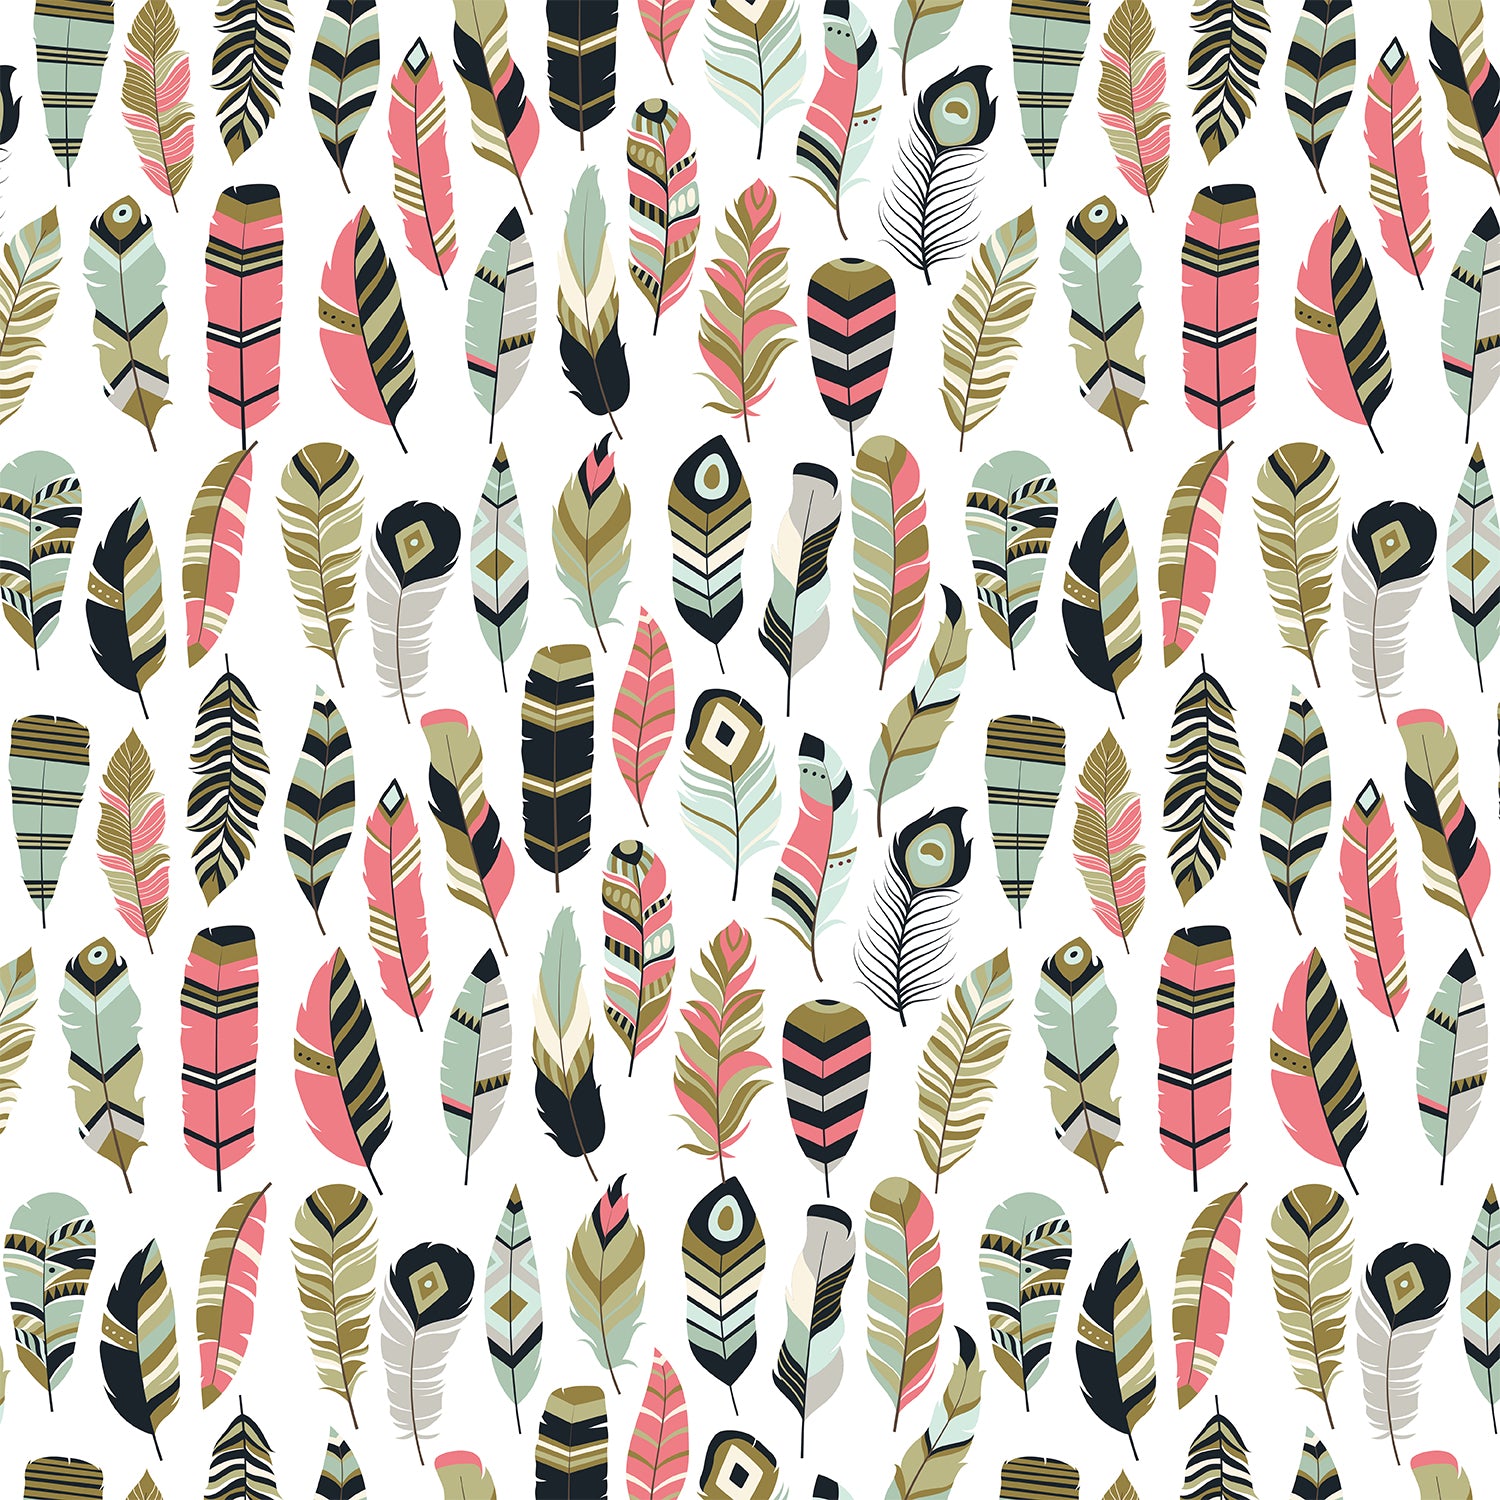 Tribal Feathers Flat Wrapping Paper Sheet Wholesale Wraphaholic